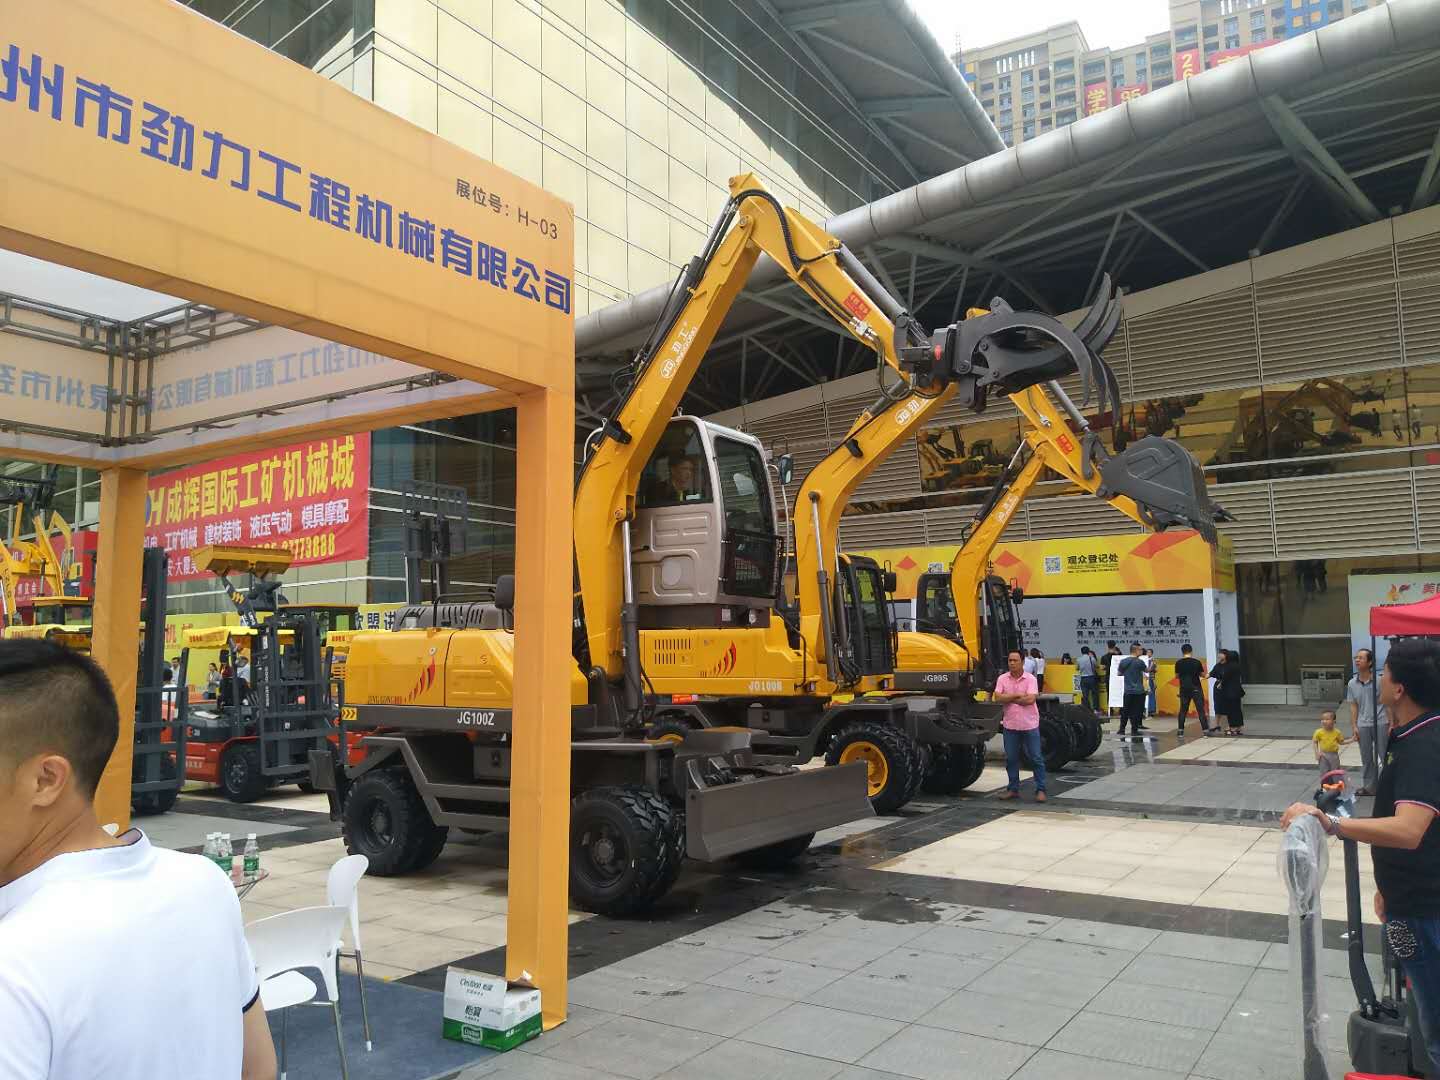 Jing Gong 100Z grapple excavator with liftable cab 